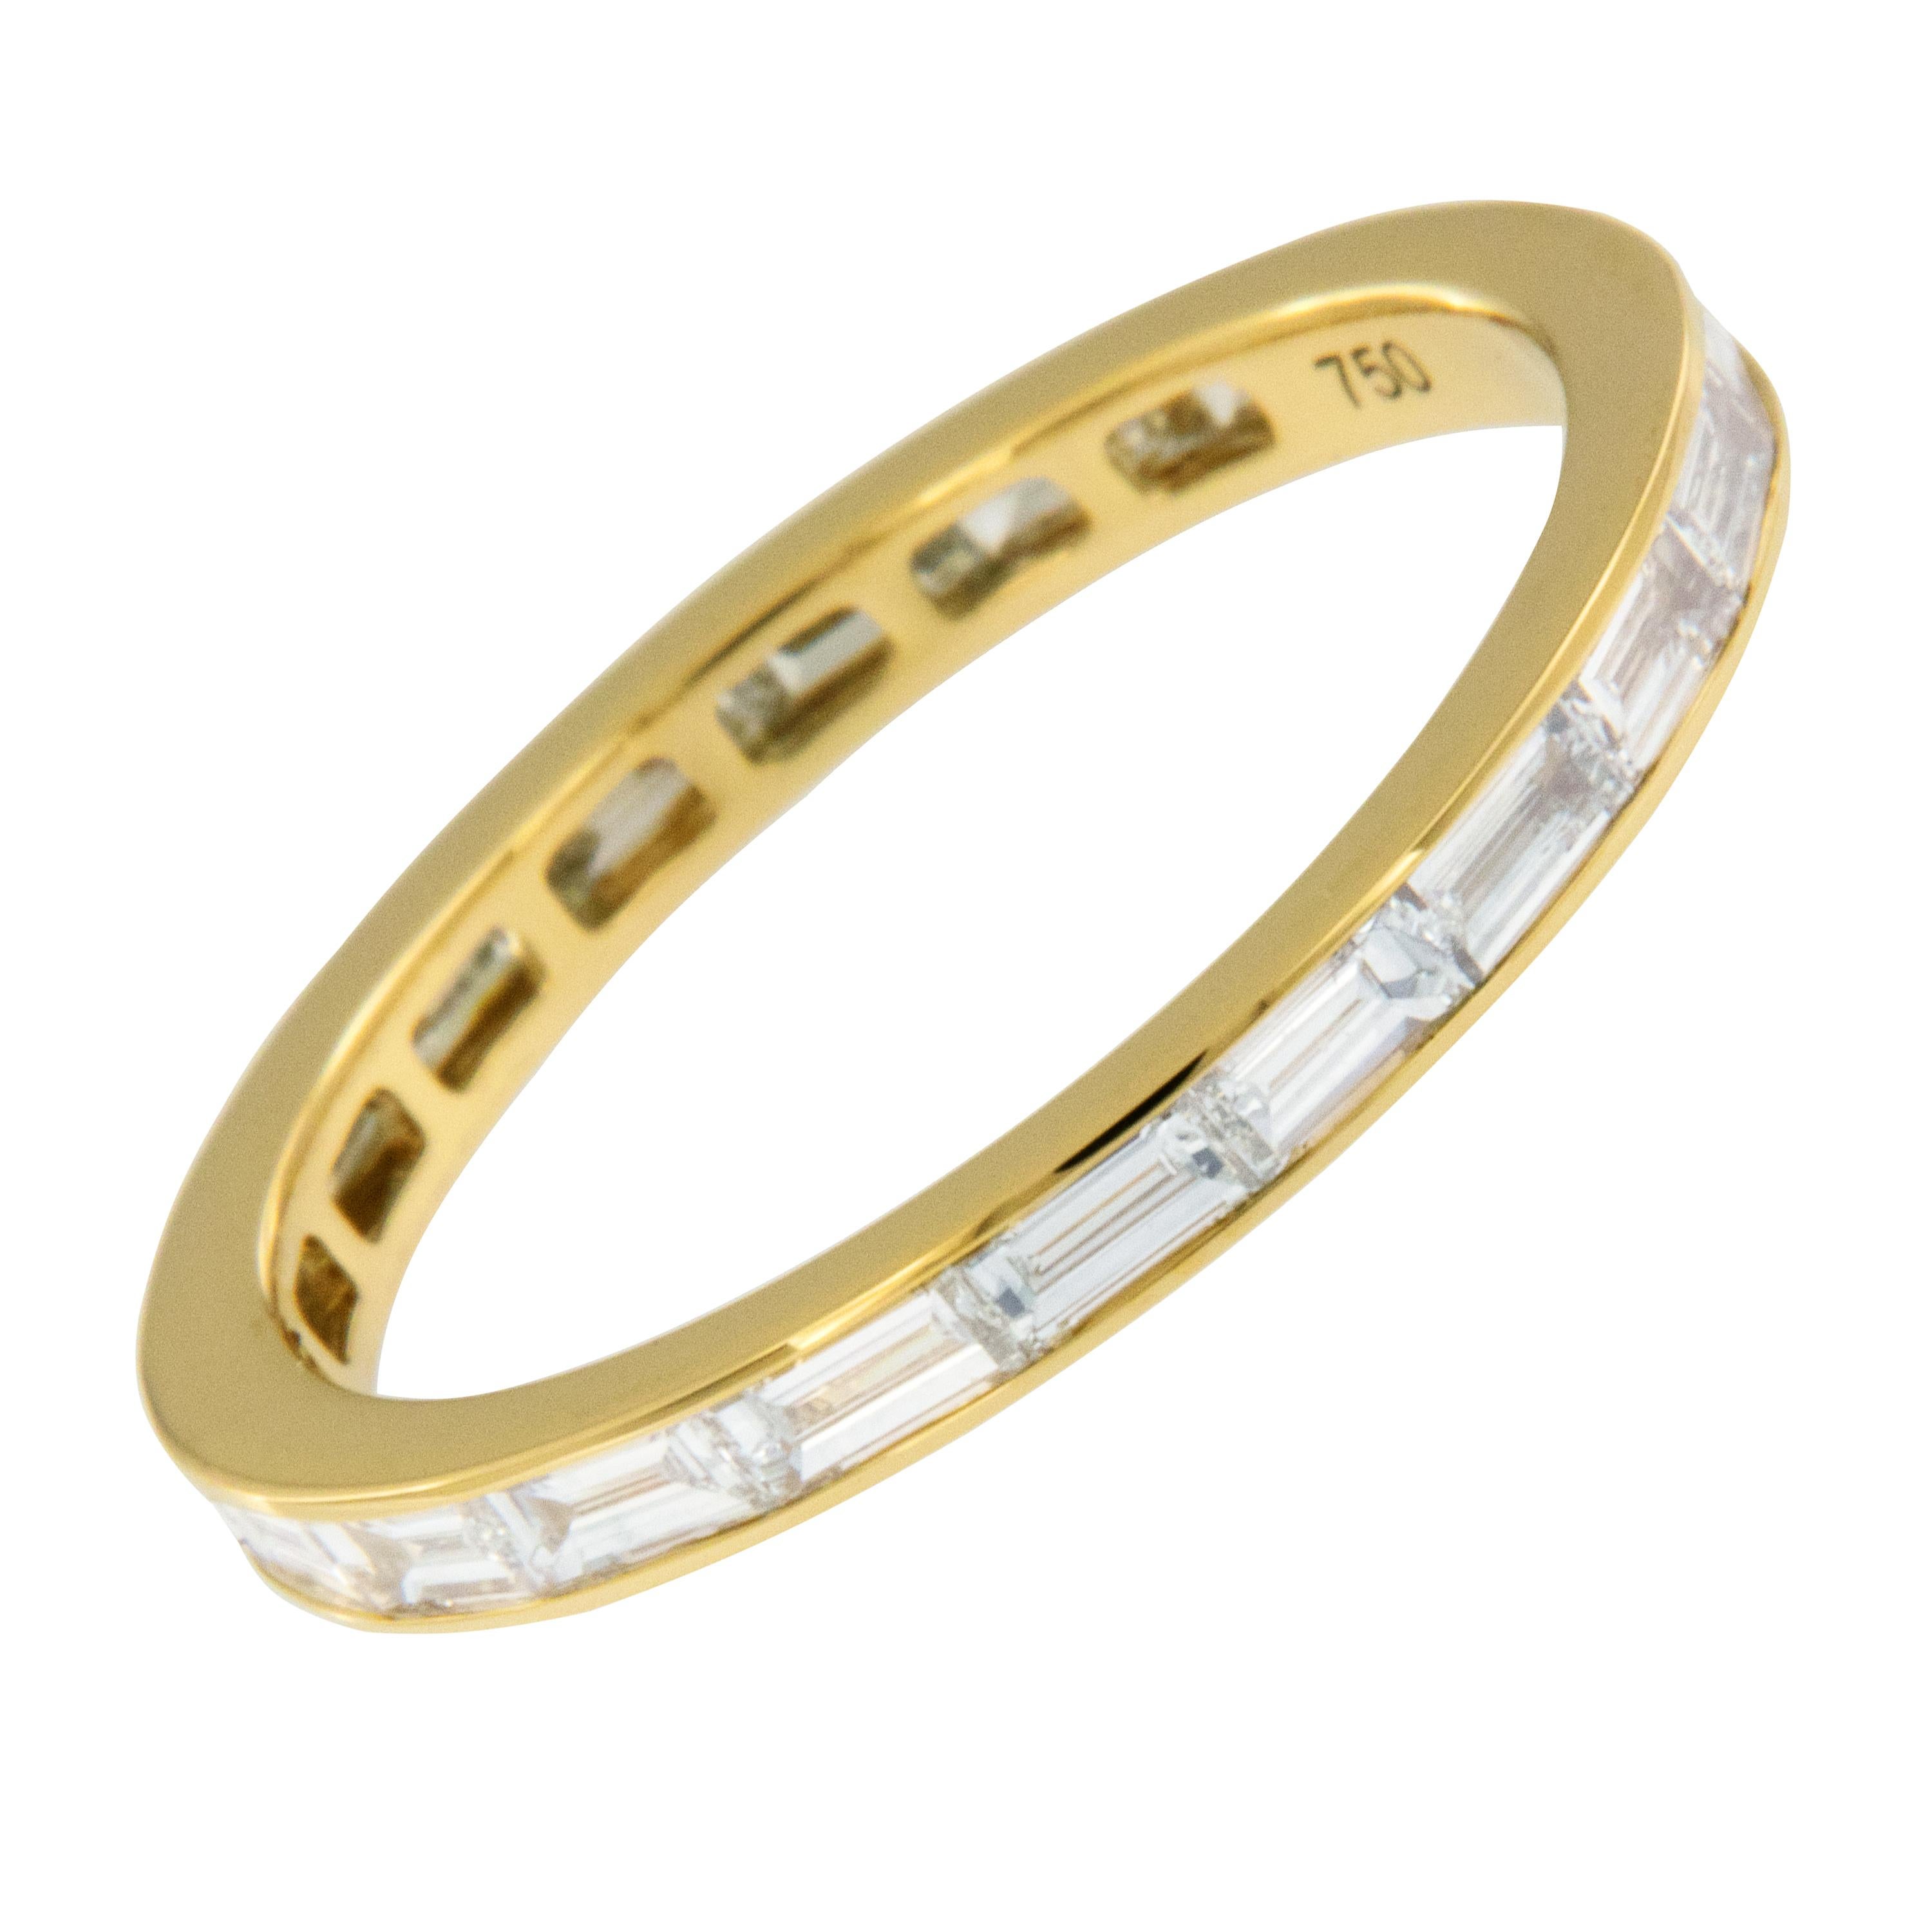 Expertly crafted in royal 18 karat yellow gold this timeless baguette cut diamond eternity band is a perfect addition to an existing engagement ring, for wearing alone and also looks fantastic stacked! 20 baguette cut fine quality diamonds (VS, F-G)